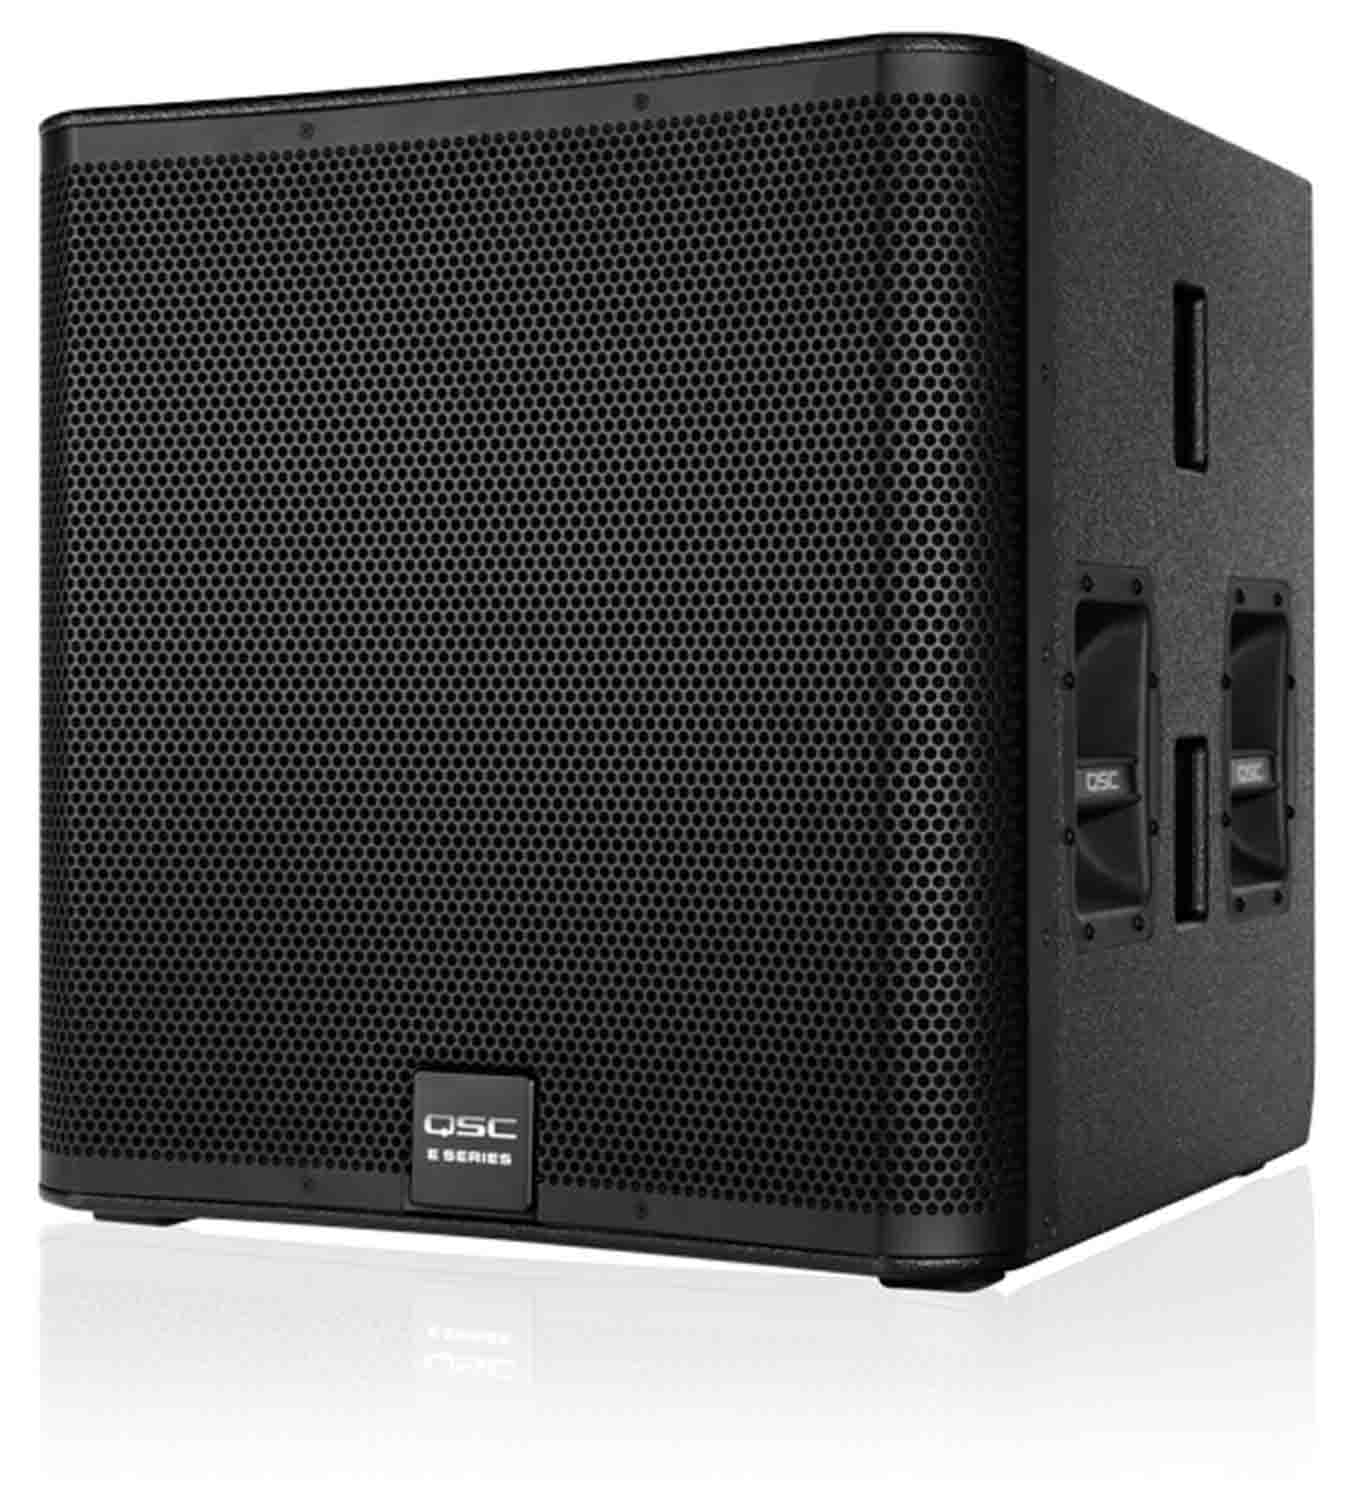 QSC E118sw, 18 inches Externally Powered Loud Speakers, Live Sound Reinforcement Subwoofer - Black - Hollywood DJ